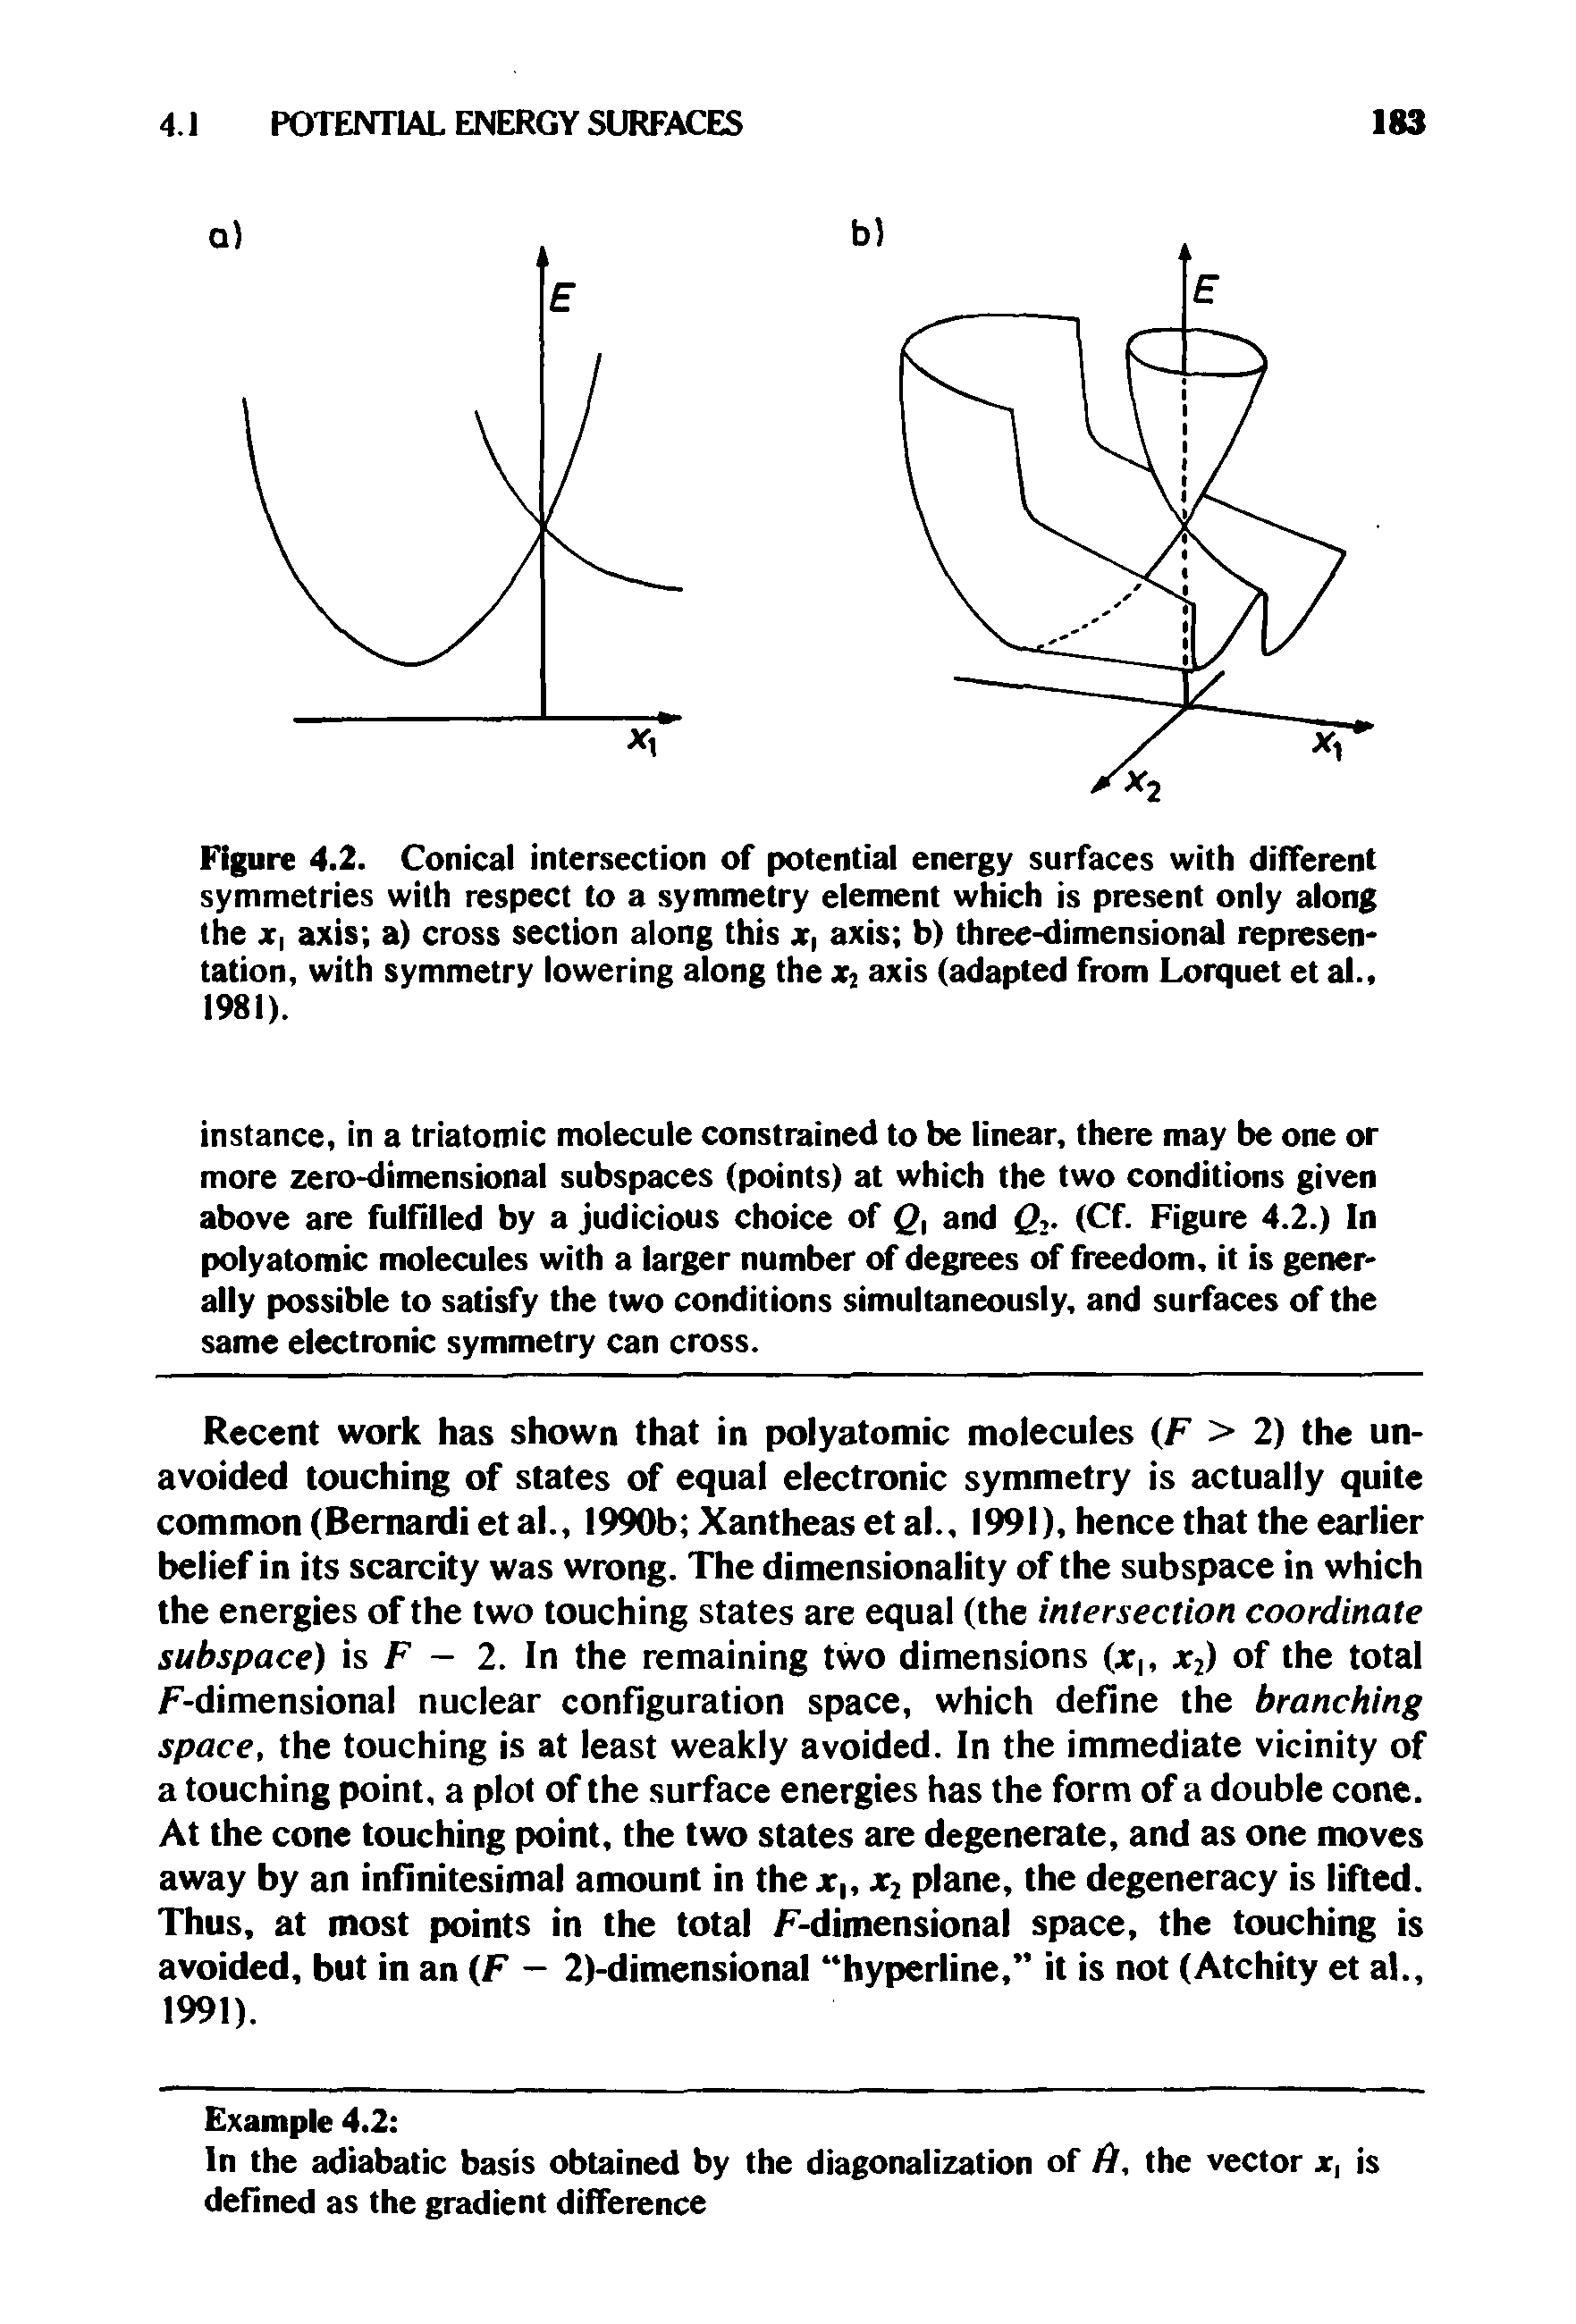 Figure 4.2. Conical intersection of potential energy surfaces with different symmetries with respect to a symmetry element which is present only along the X, axis a) cross section along this x, axis b) three-dimensional representation, with symmetry lowering along the x axis (adapted from Lorquet et al..